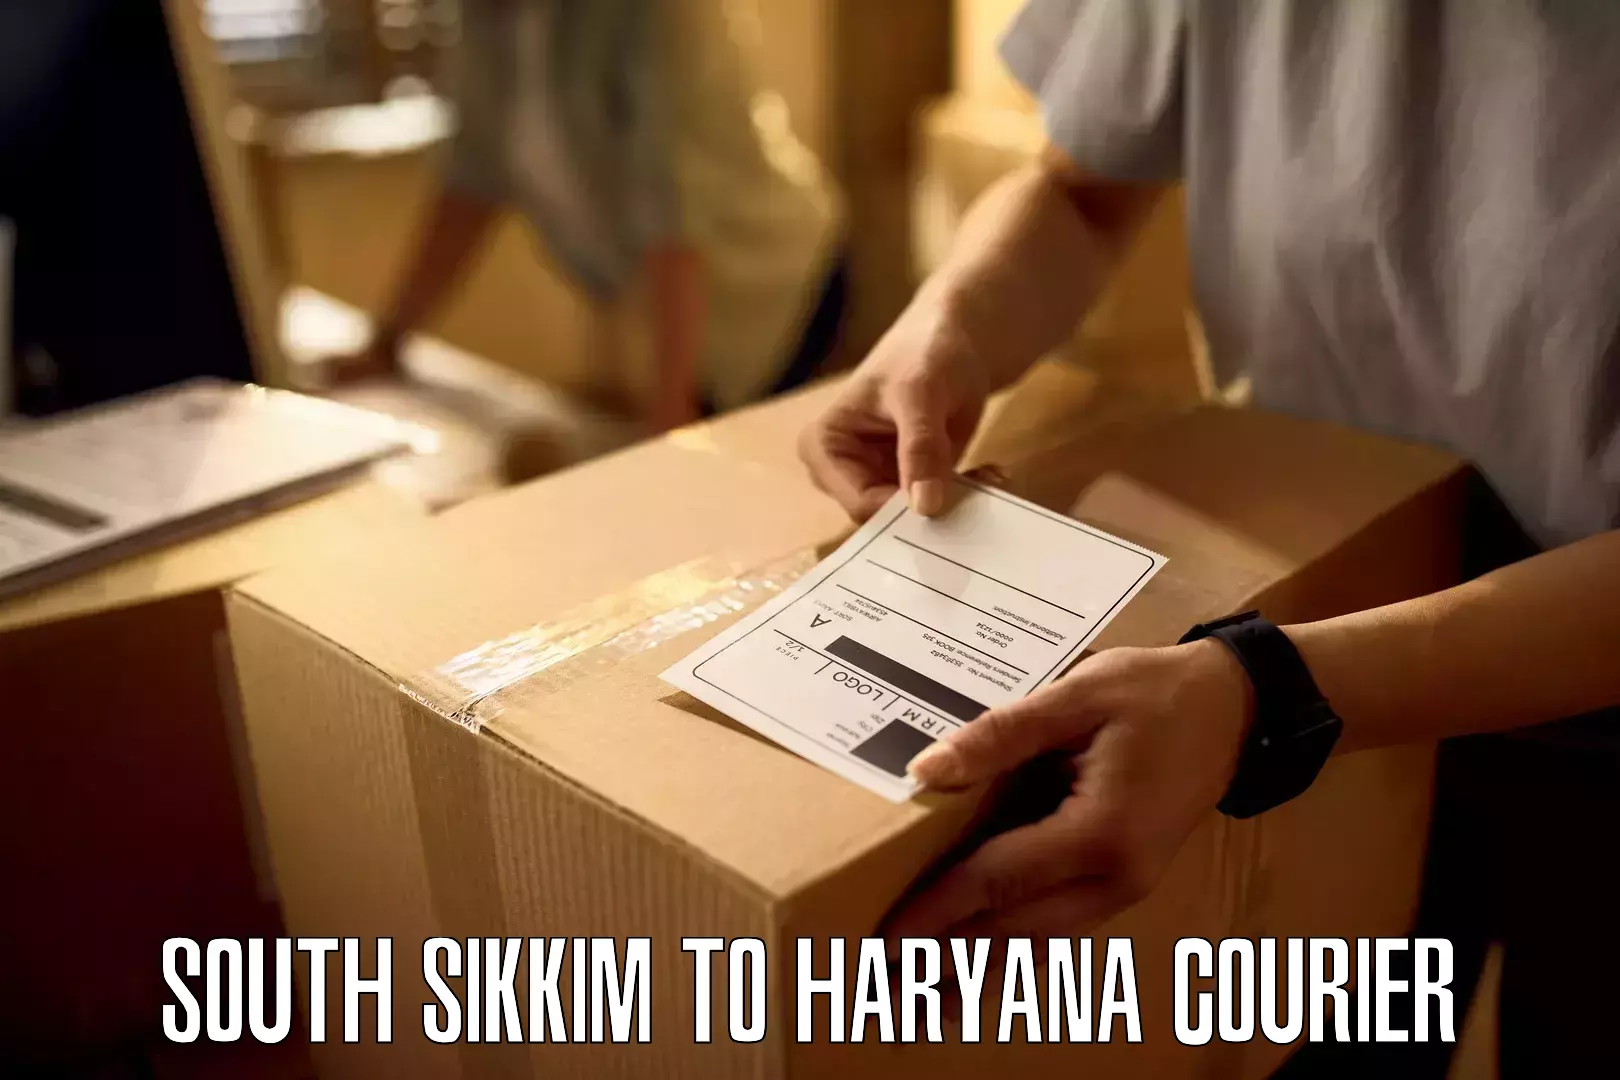 Courier app in South Sikkim to Dharuhera